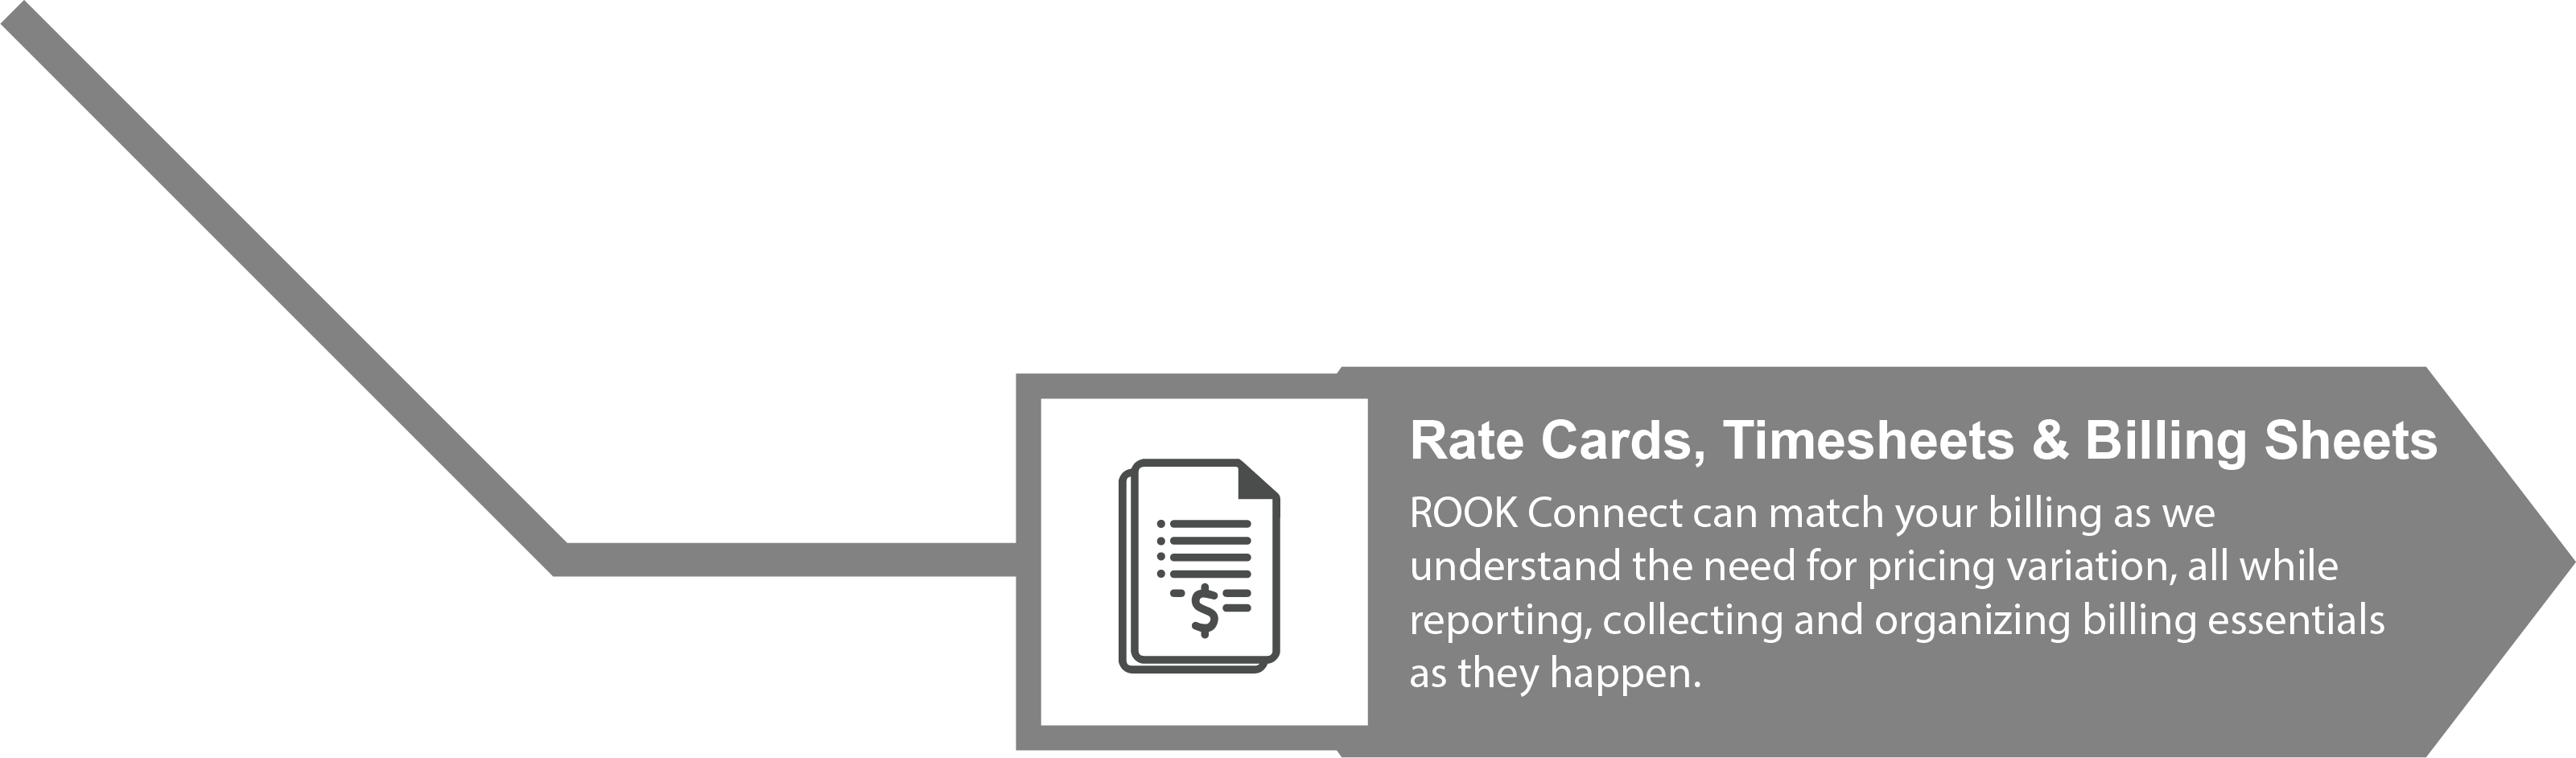 Rate Cards, Timesheets & Billing Sheets